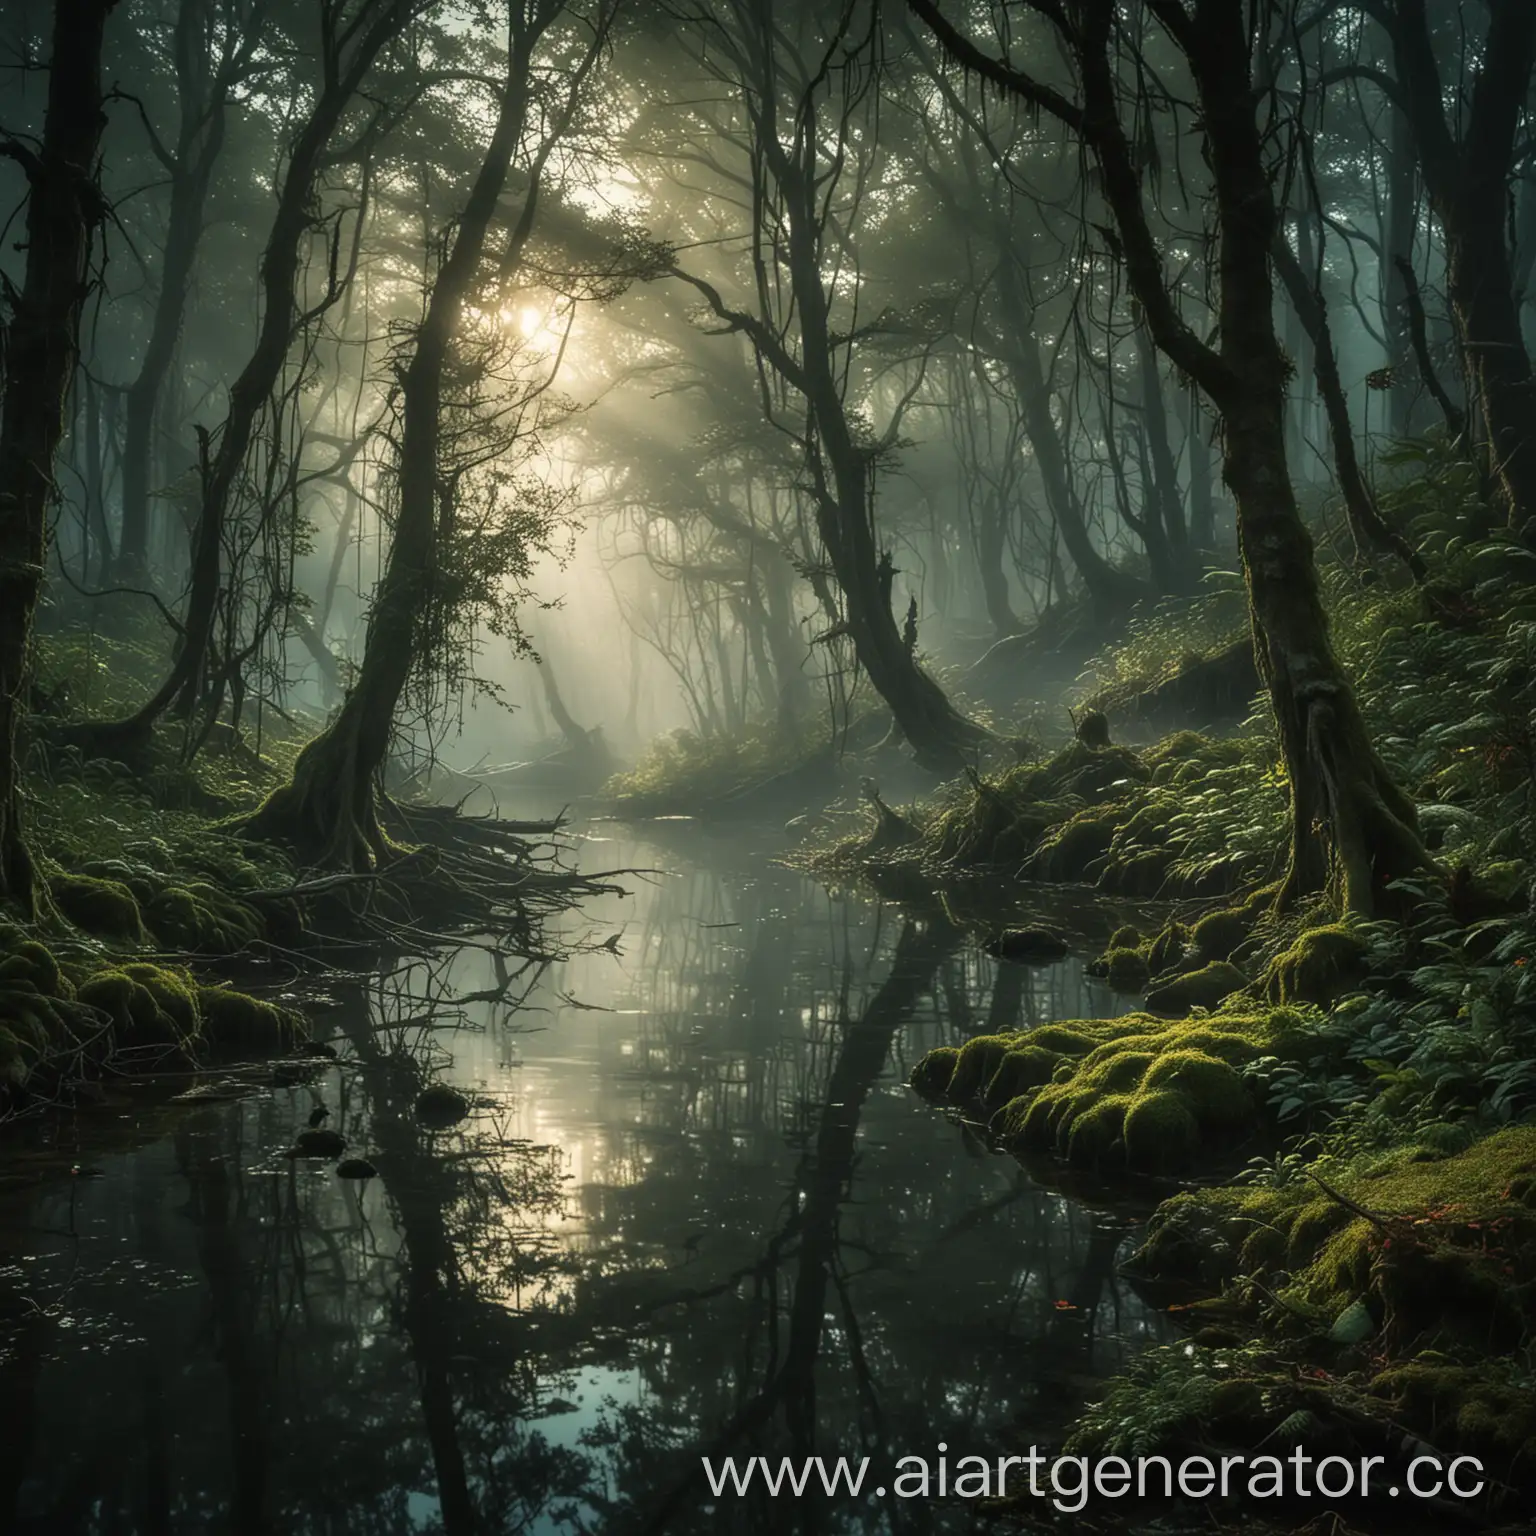 Enchanted-Forest-Reflection-Tranquil-Mystical-Woods-by-the-Water